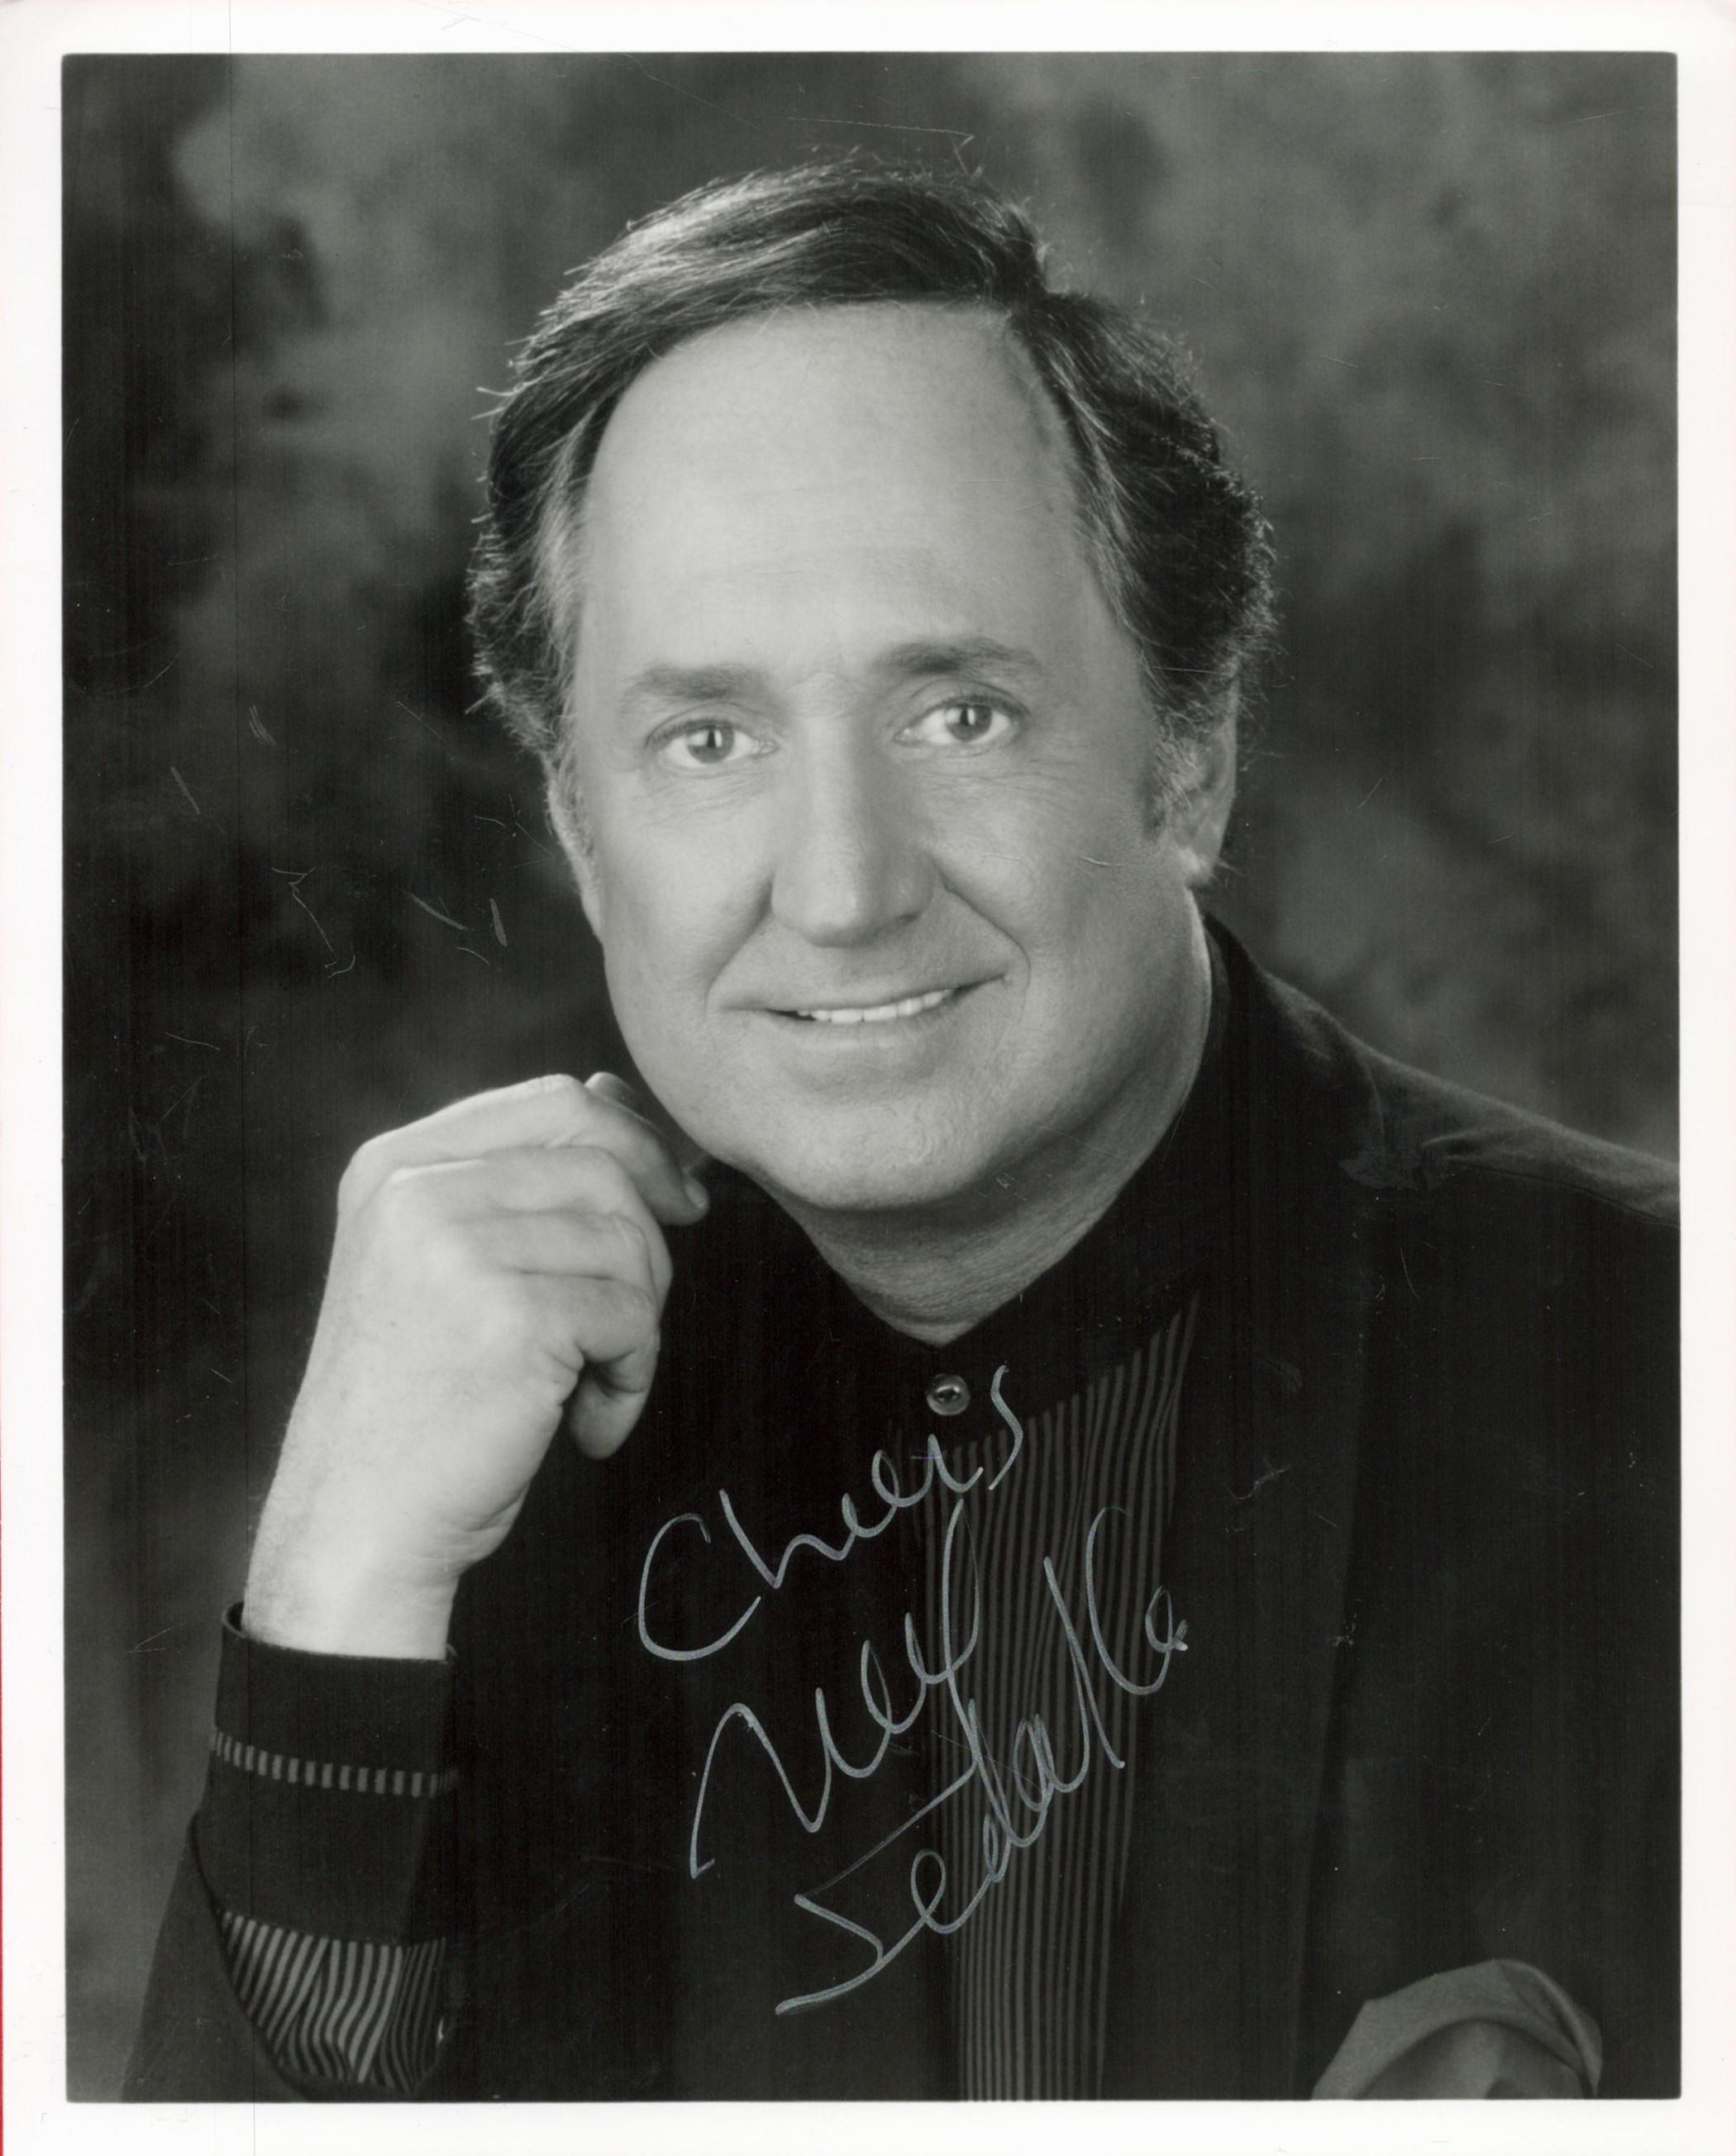 American Singer Neil Sedaka Signed 10x8 inch Black and White Photo. Good condition. All autographs